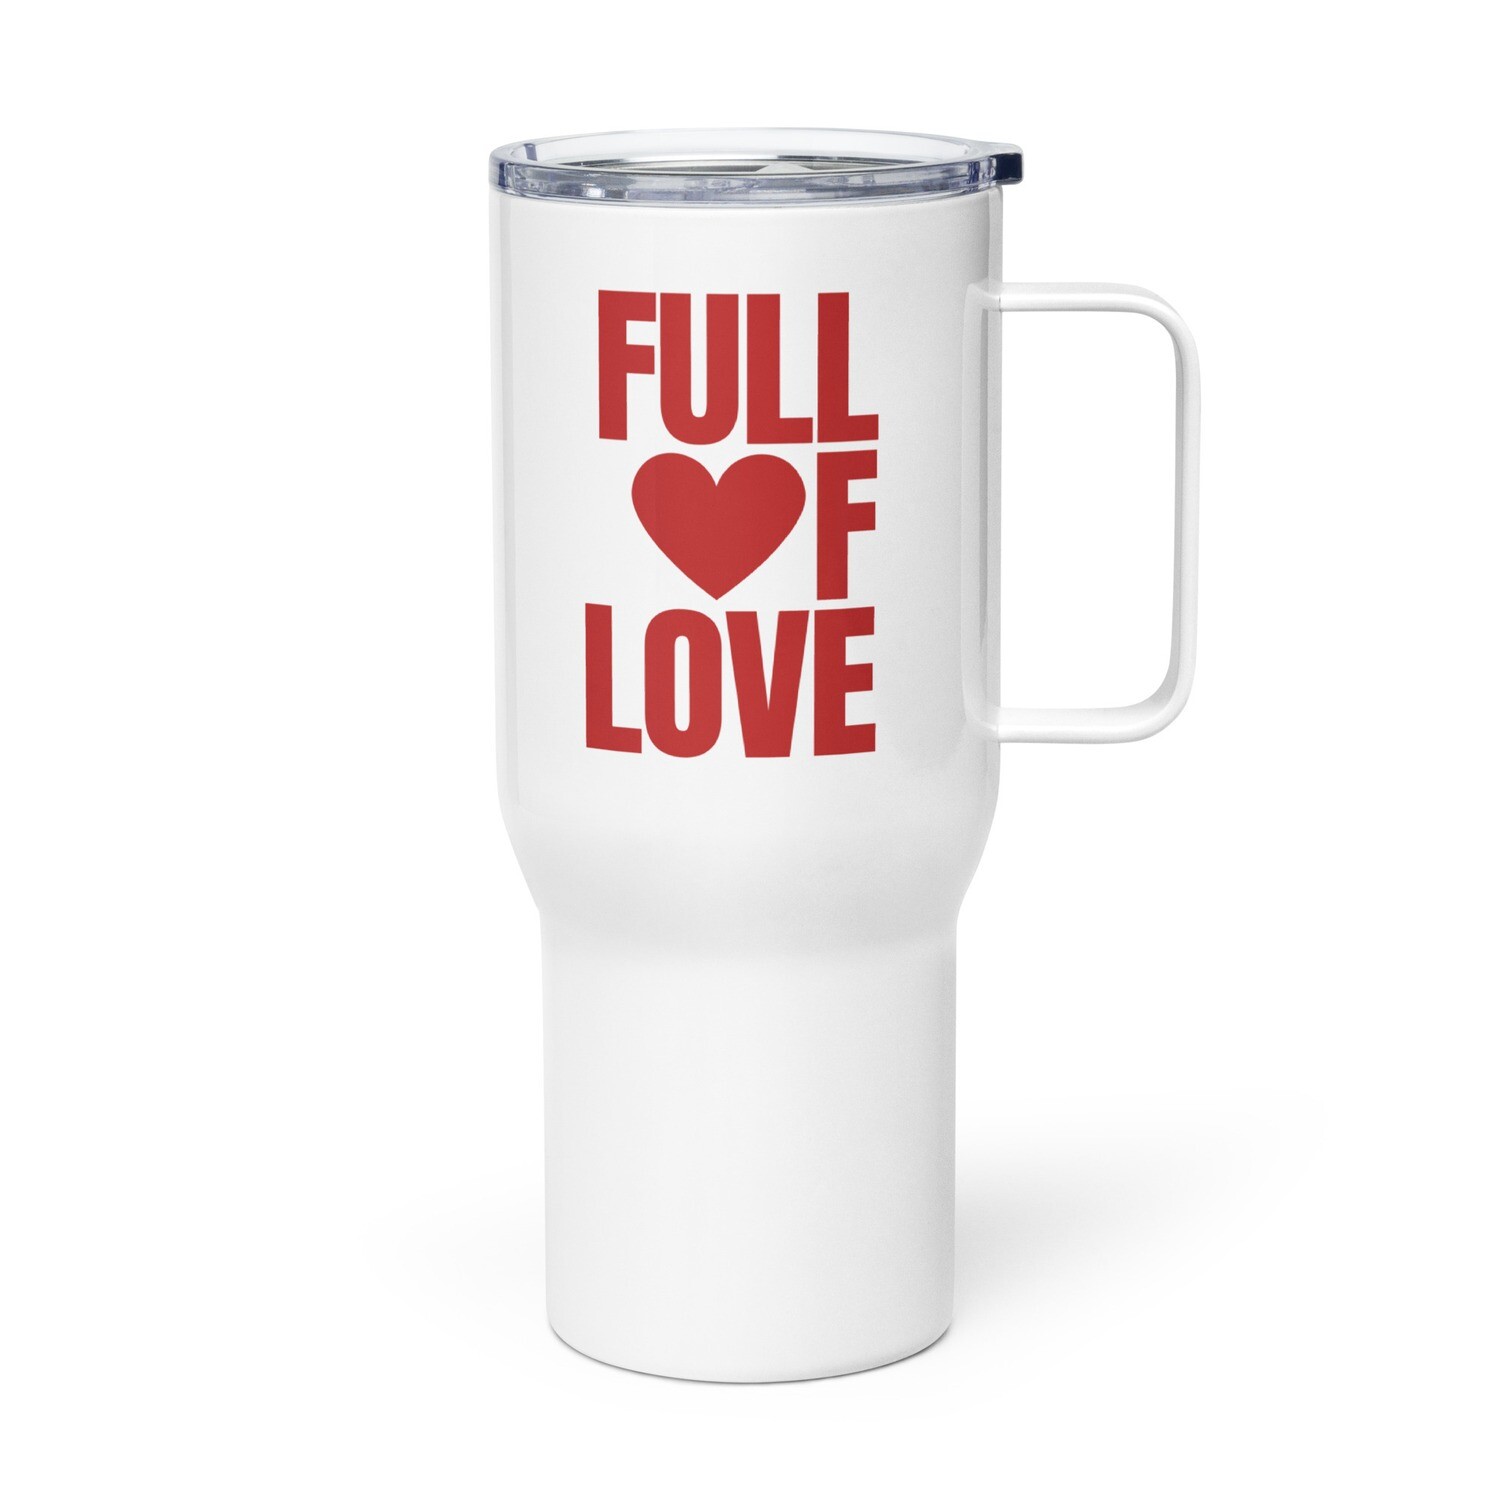 Full of Love - Travel mug with a handle